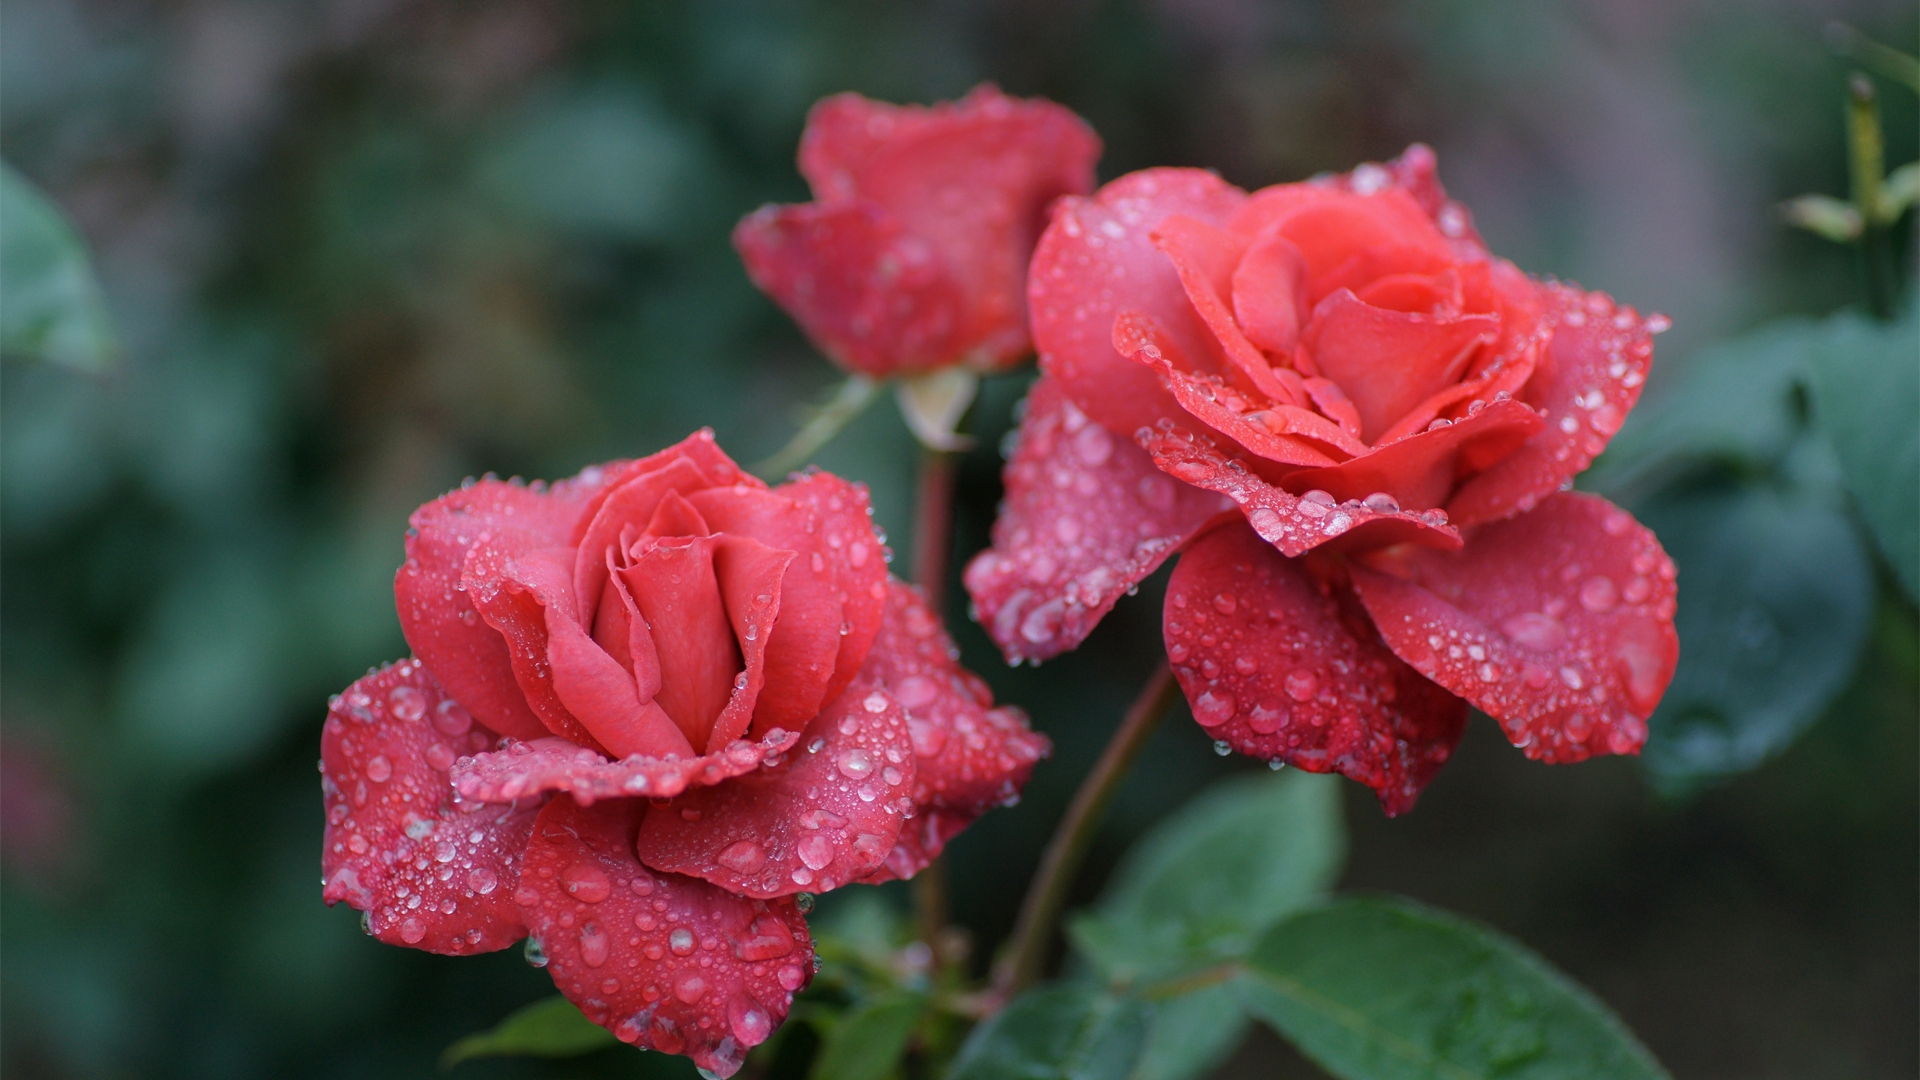 Image: Rose, roses, red, drops, dew, water